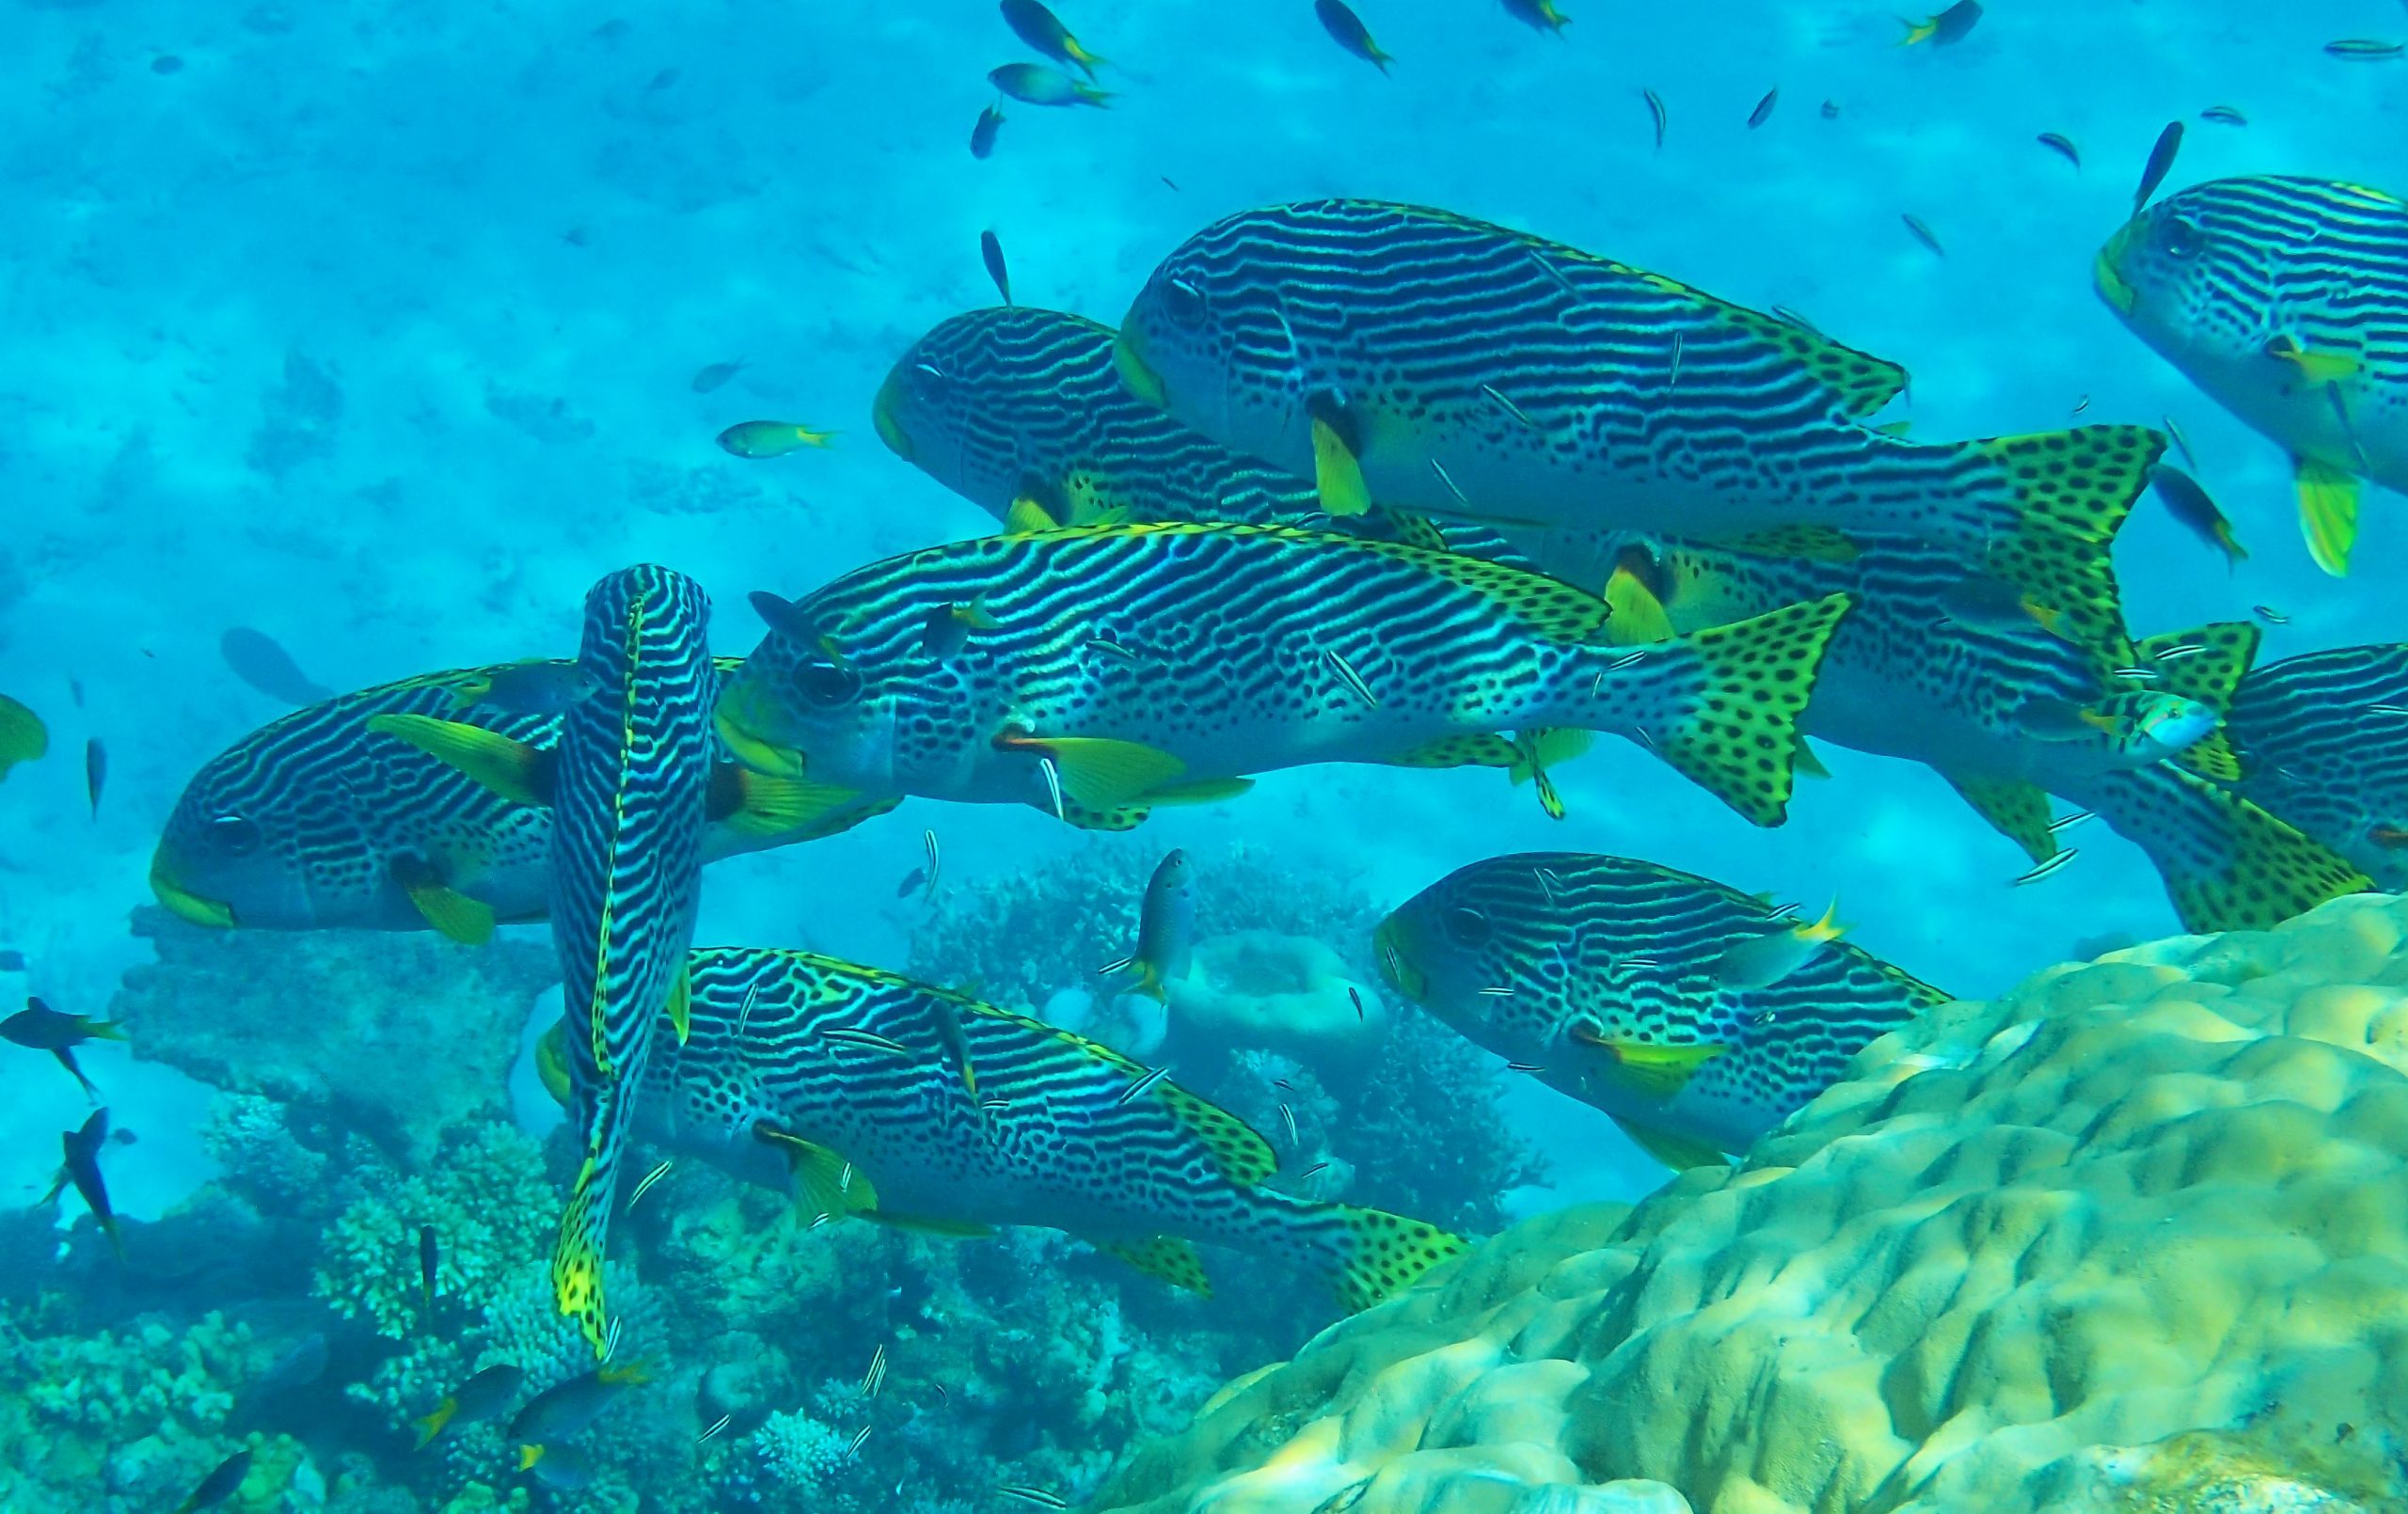 Sweetlips on the Great Barrier Reef